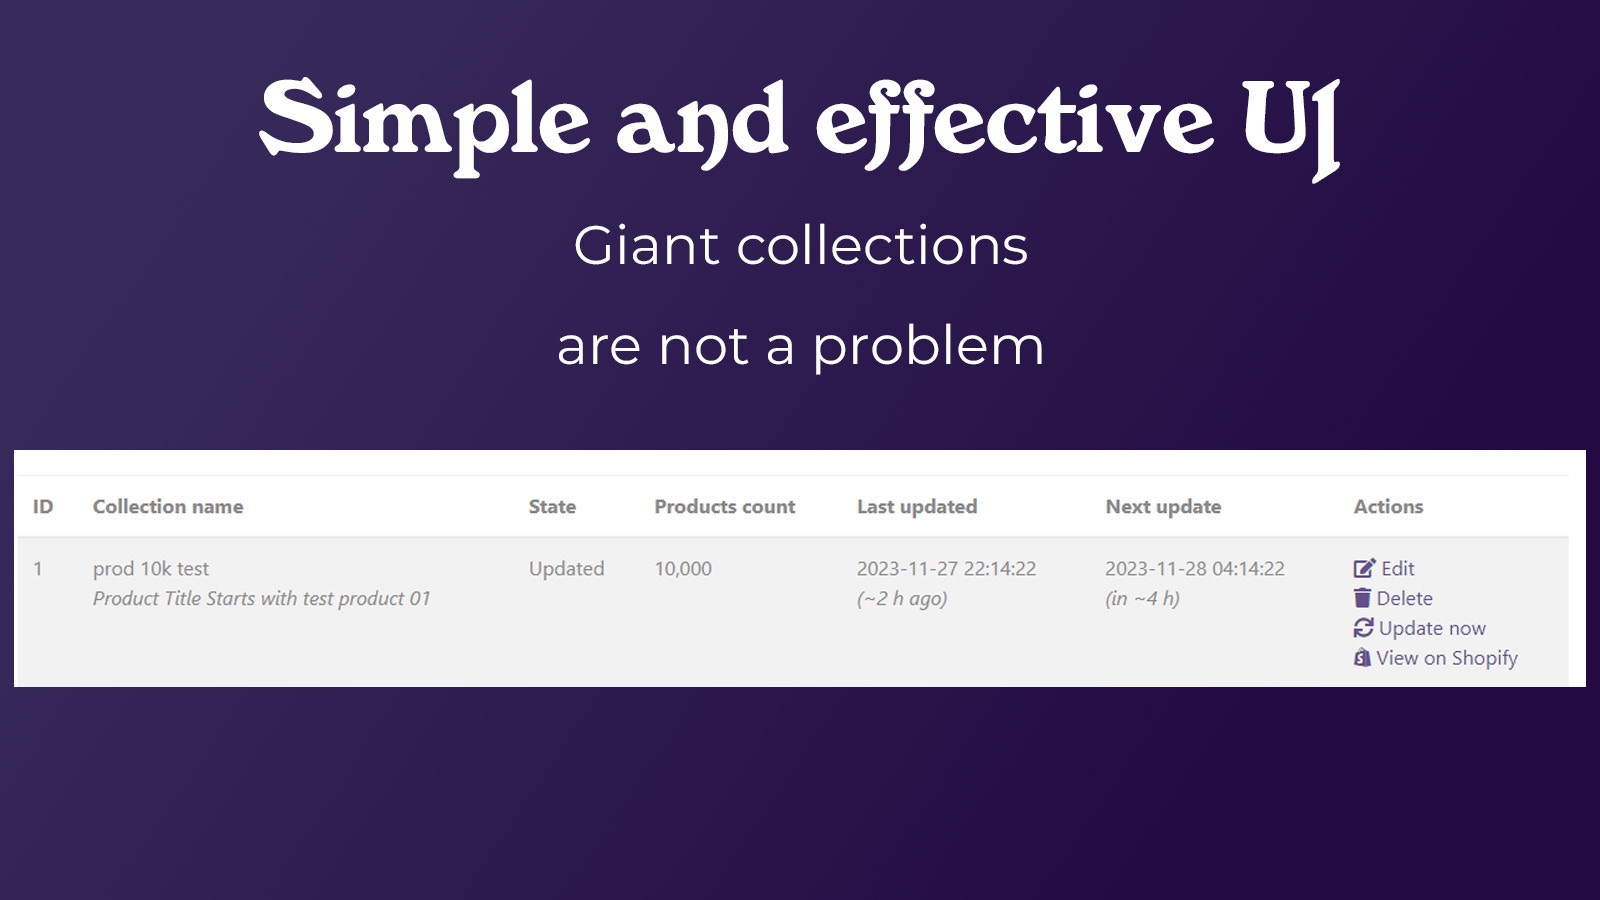 Simple and effective UI supports small & big collections